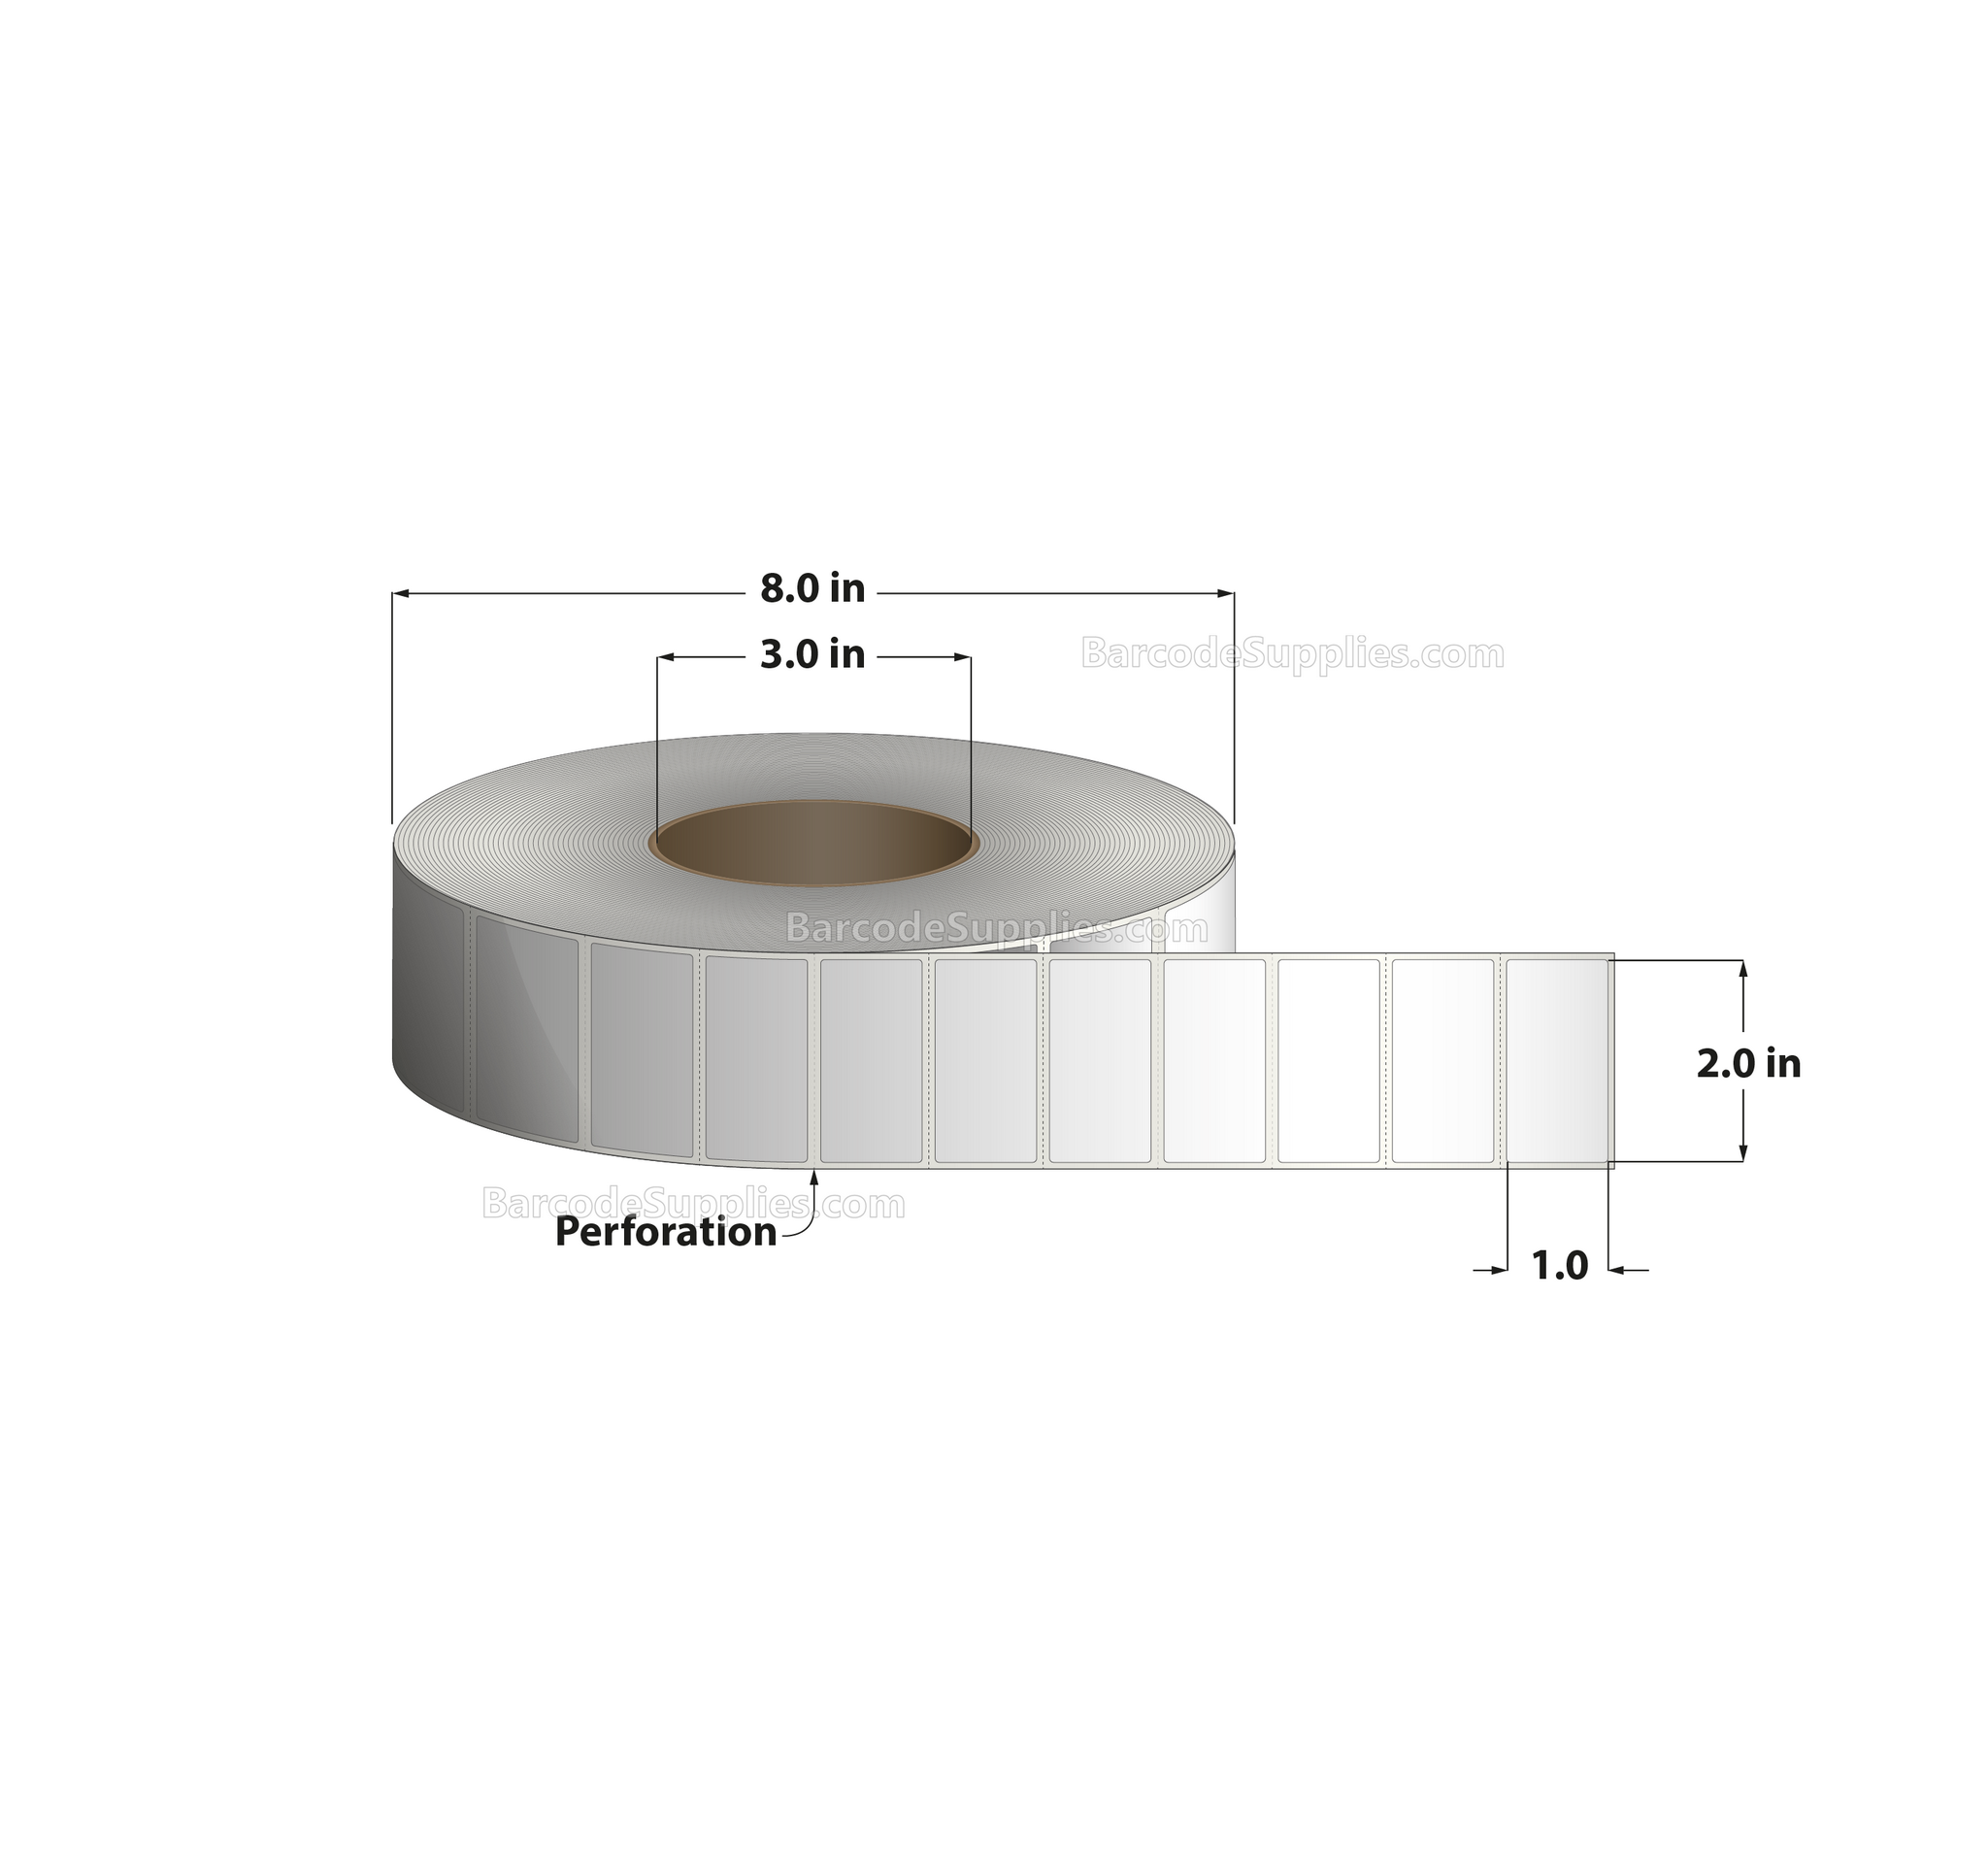 2 x 1 Thermal Transfer White Labels With Permanent Adhesive - Perforated - 11,000 Labels Per Roll - Carton Of 4 Rolls - 44000 Labels Total - MPN: RT-2-1-11000-3